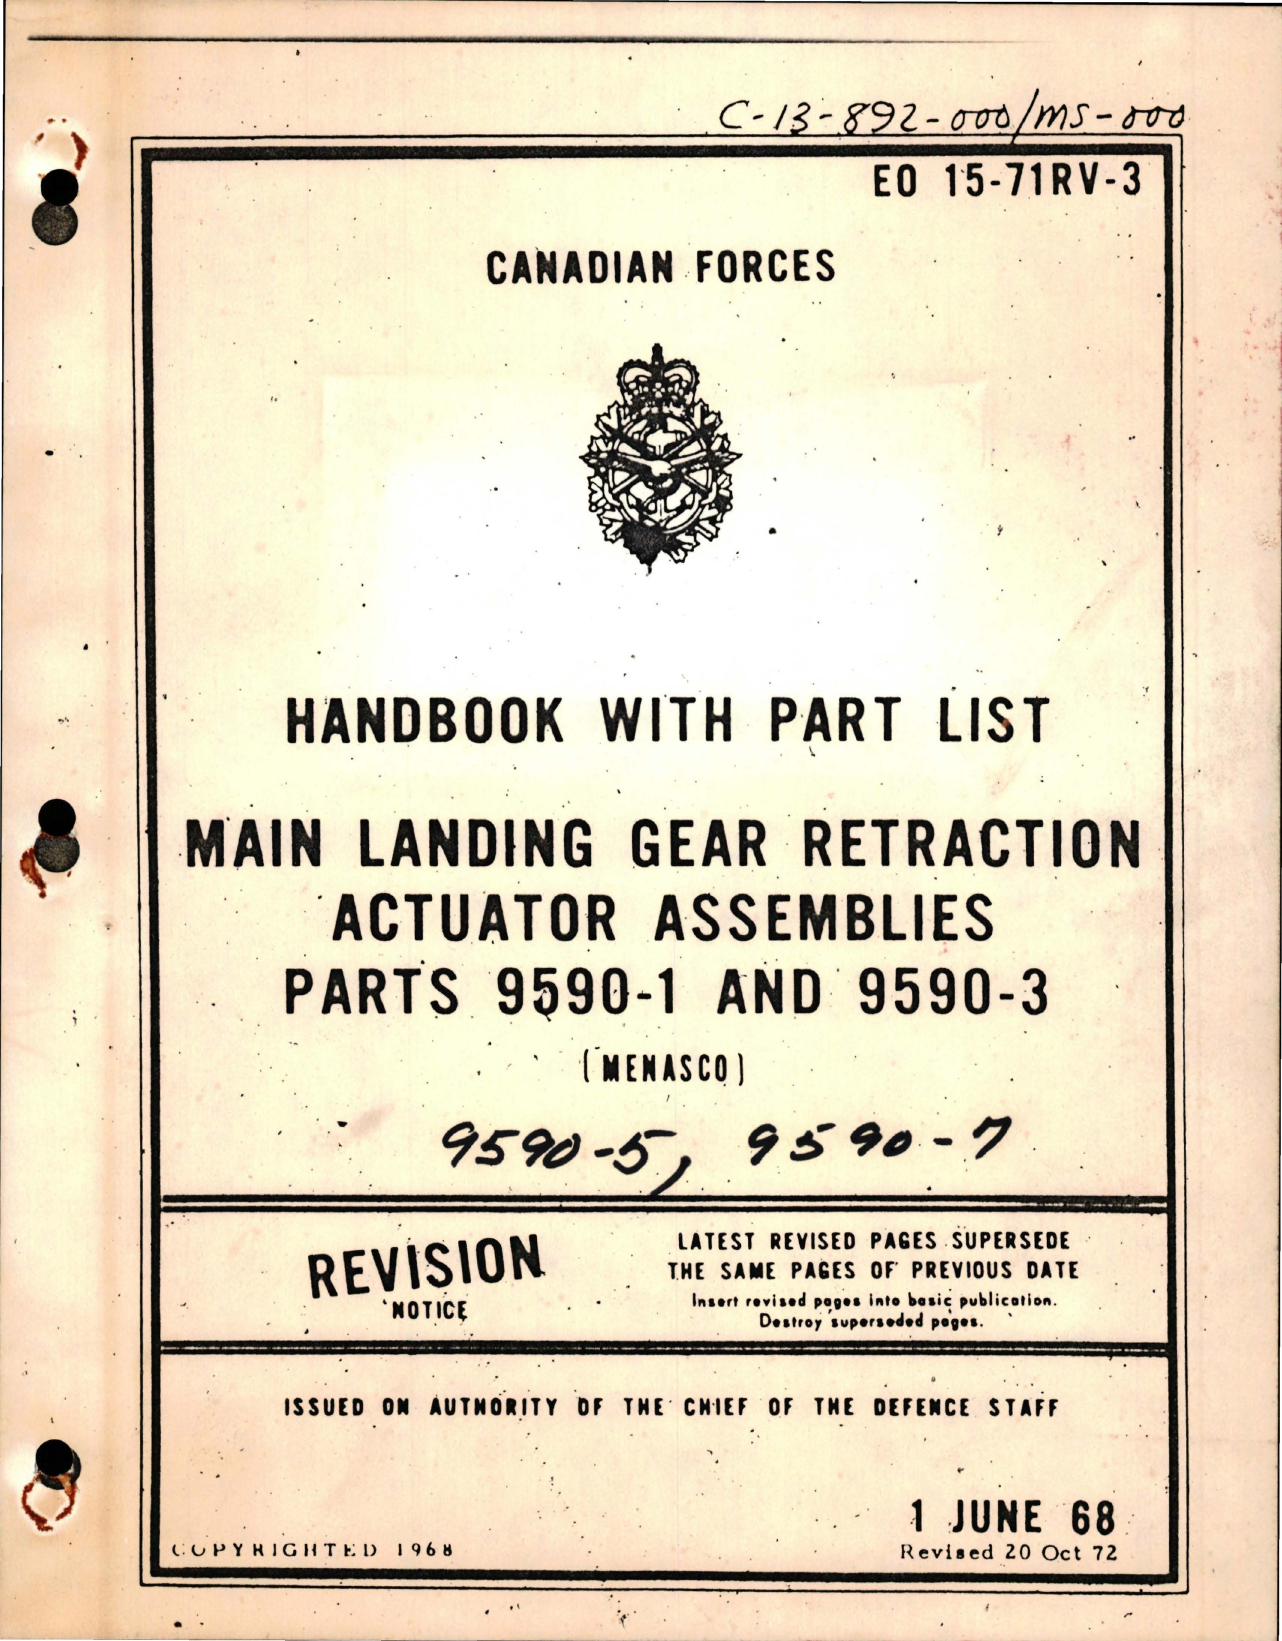 Sample page 1 from AirCorps Library document: Handbook with Parts List for Main Landing Gear Retraction Actuator Assemblies - Parts 9590-1 and 9590-3